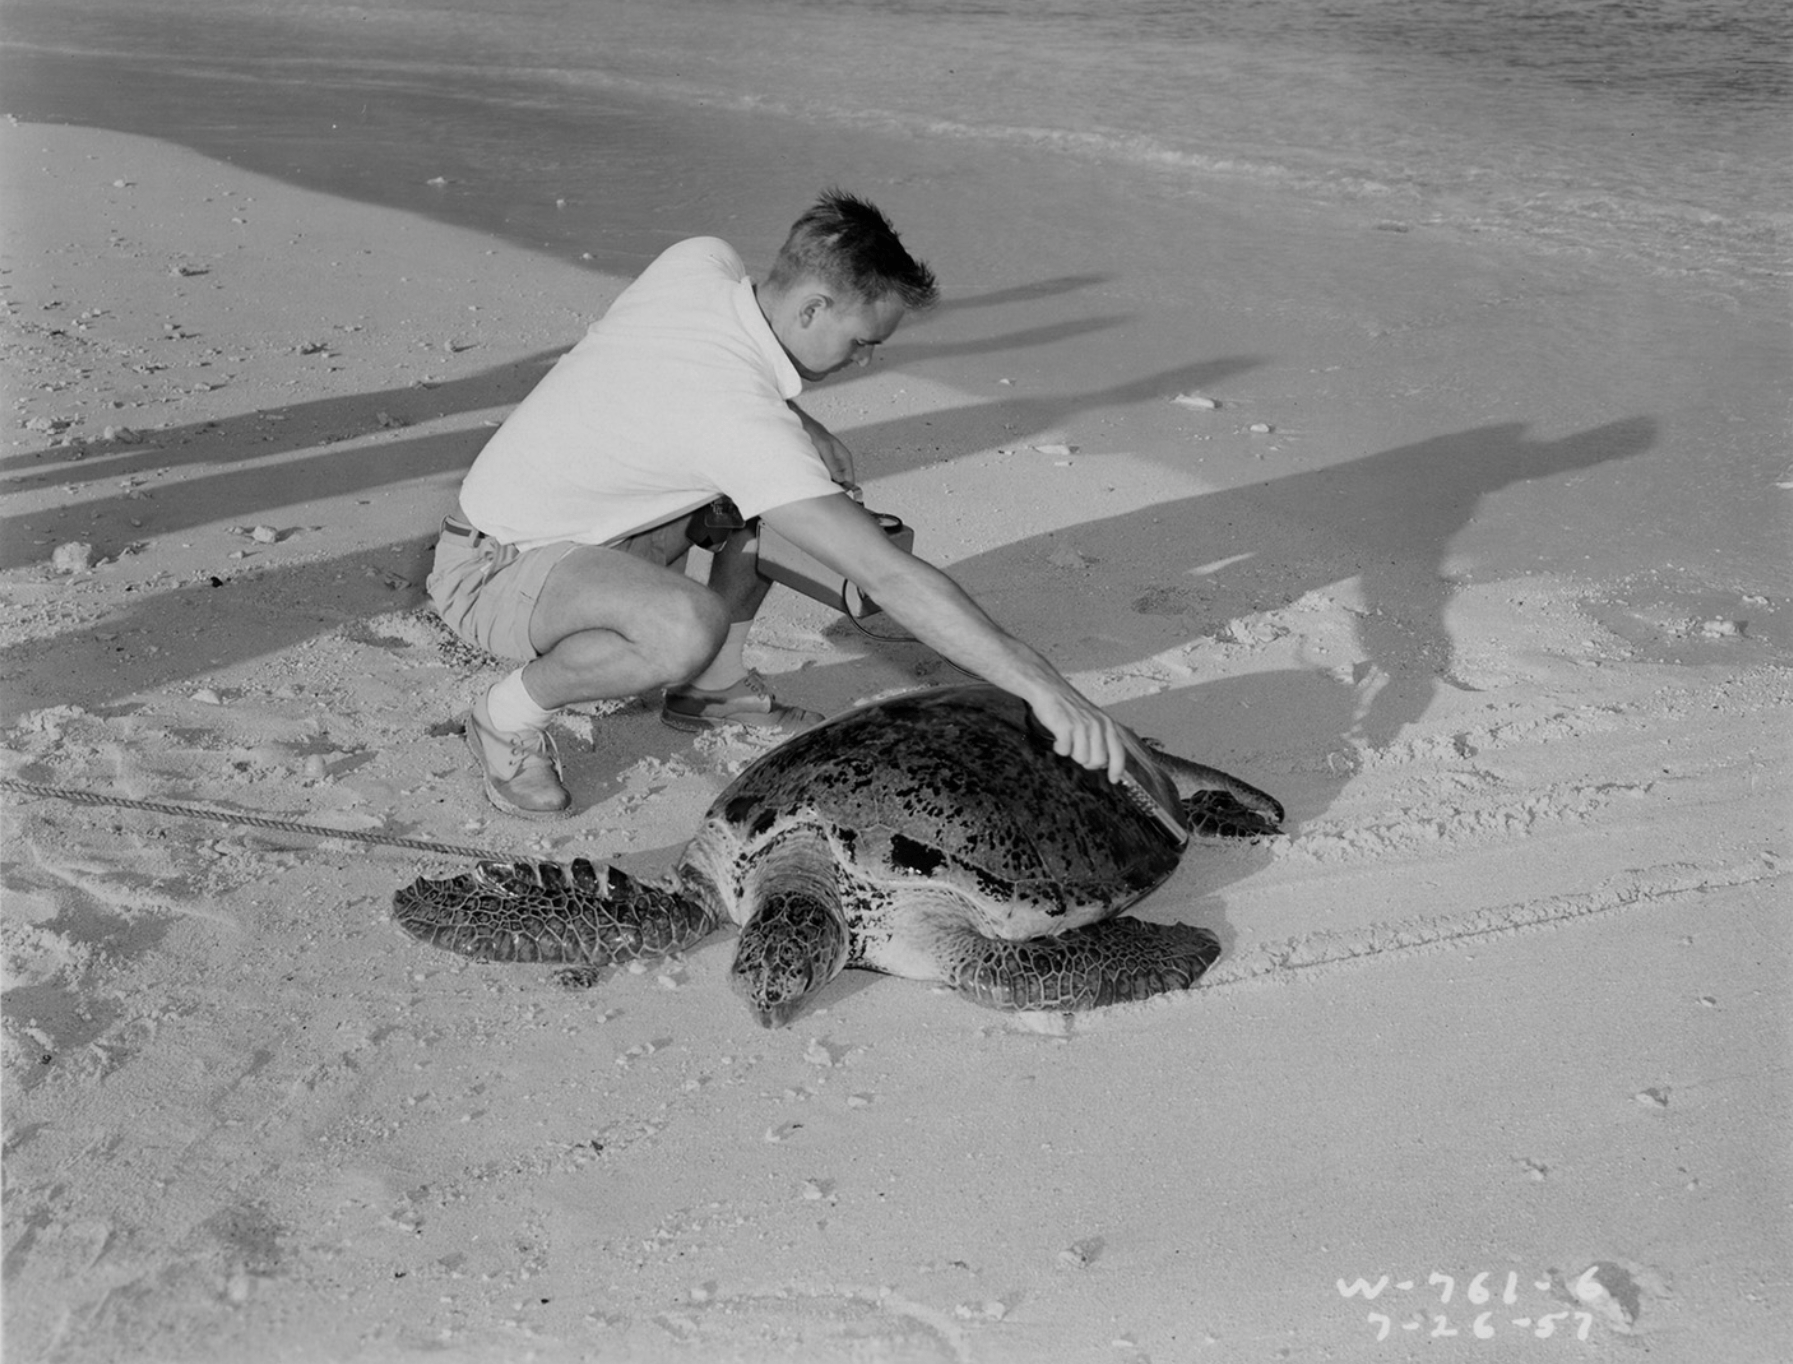 black and white photograph of a man measuring a large turtle on a beach